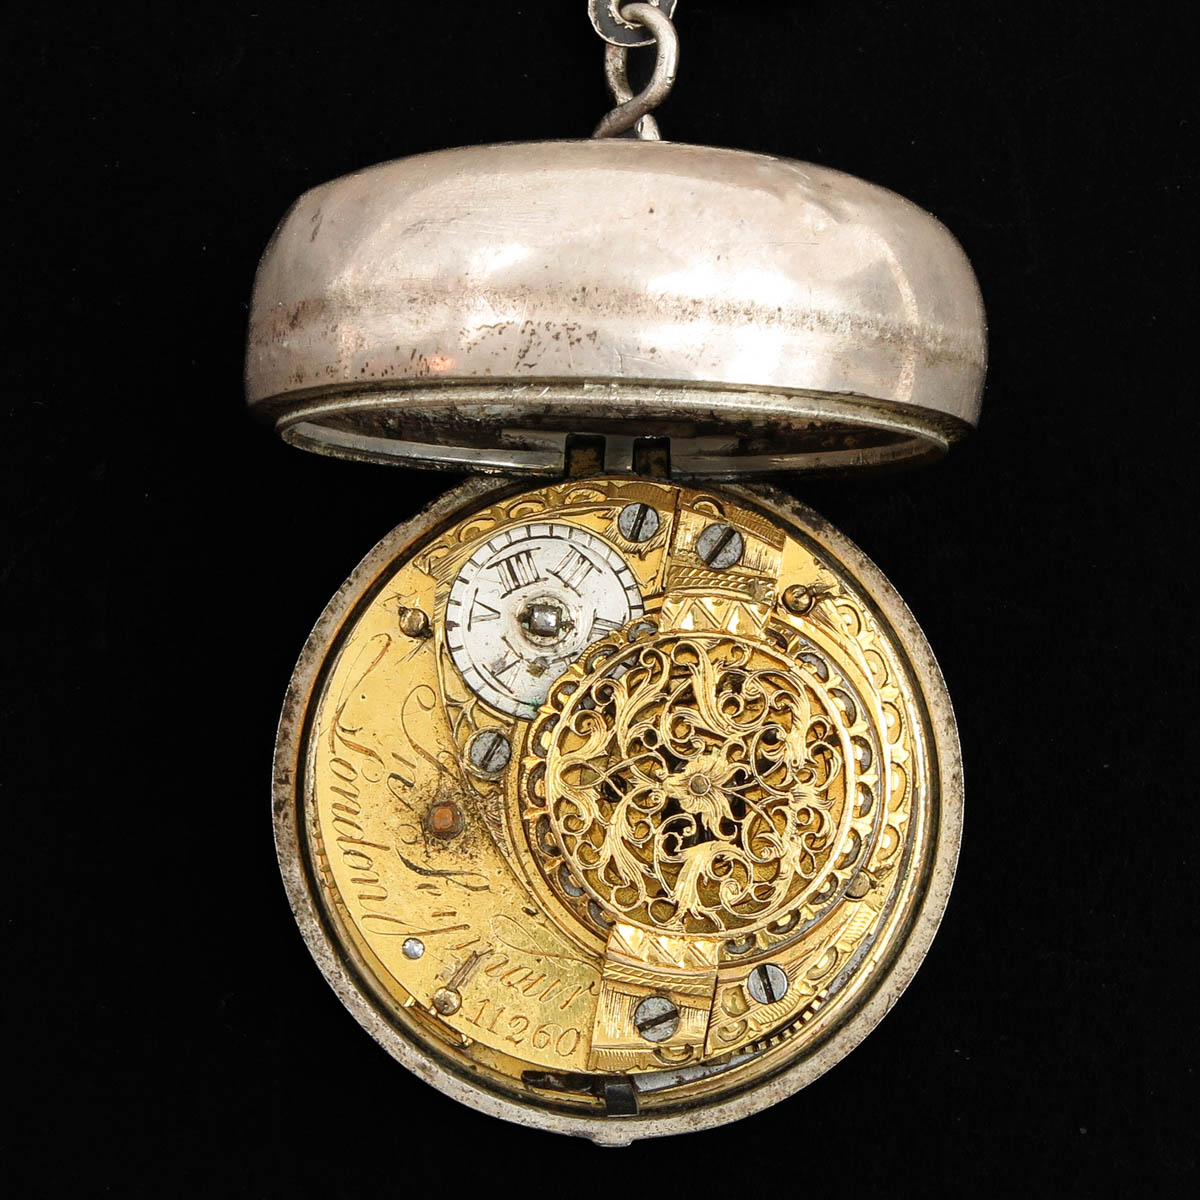 An 18th Century Silver Pocket Watch - Image 4 of 10